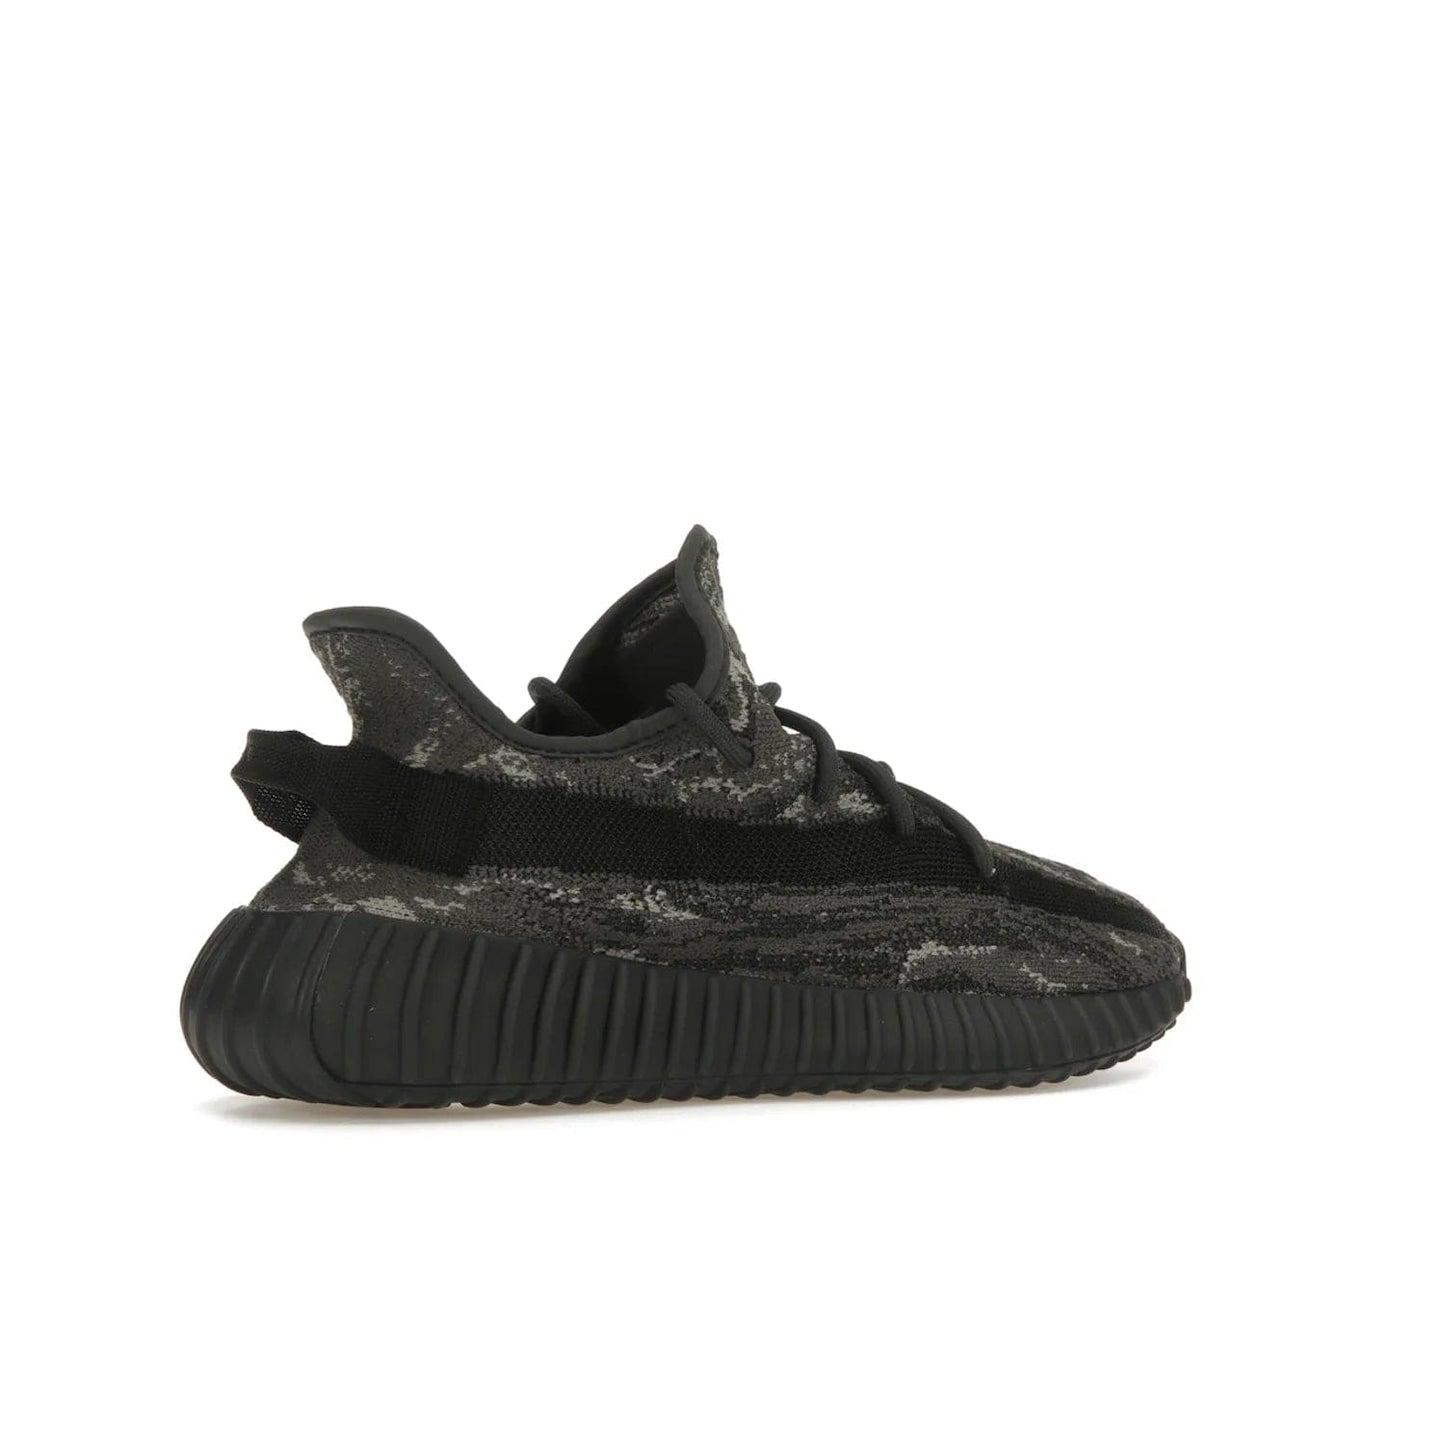 adidas Yeezy Boost 350 V2 MX Dark Salt - Image 34 - Only at www.BallersClubKickz.com - ##
The adidas Yeezy Boost 350 V2 MX Dark Salt offers a contemporary look with a signature combination of grey and black hues. Cushioned Boost midsole and side stripe allow for all day wear. Get the perfect fashion-forward addition with this sleek sneaker for $230.